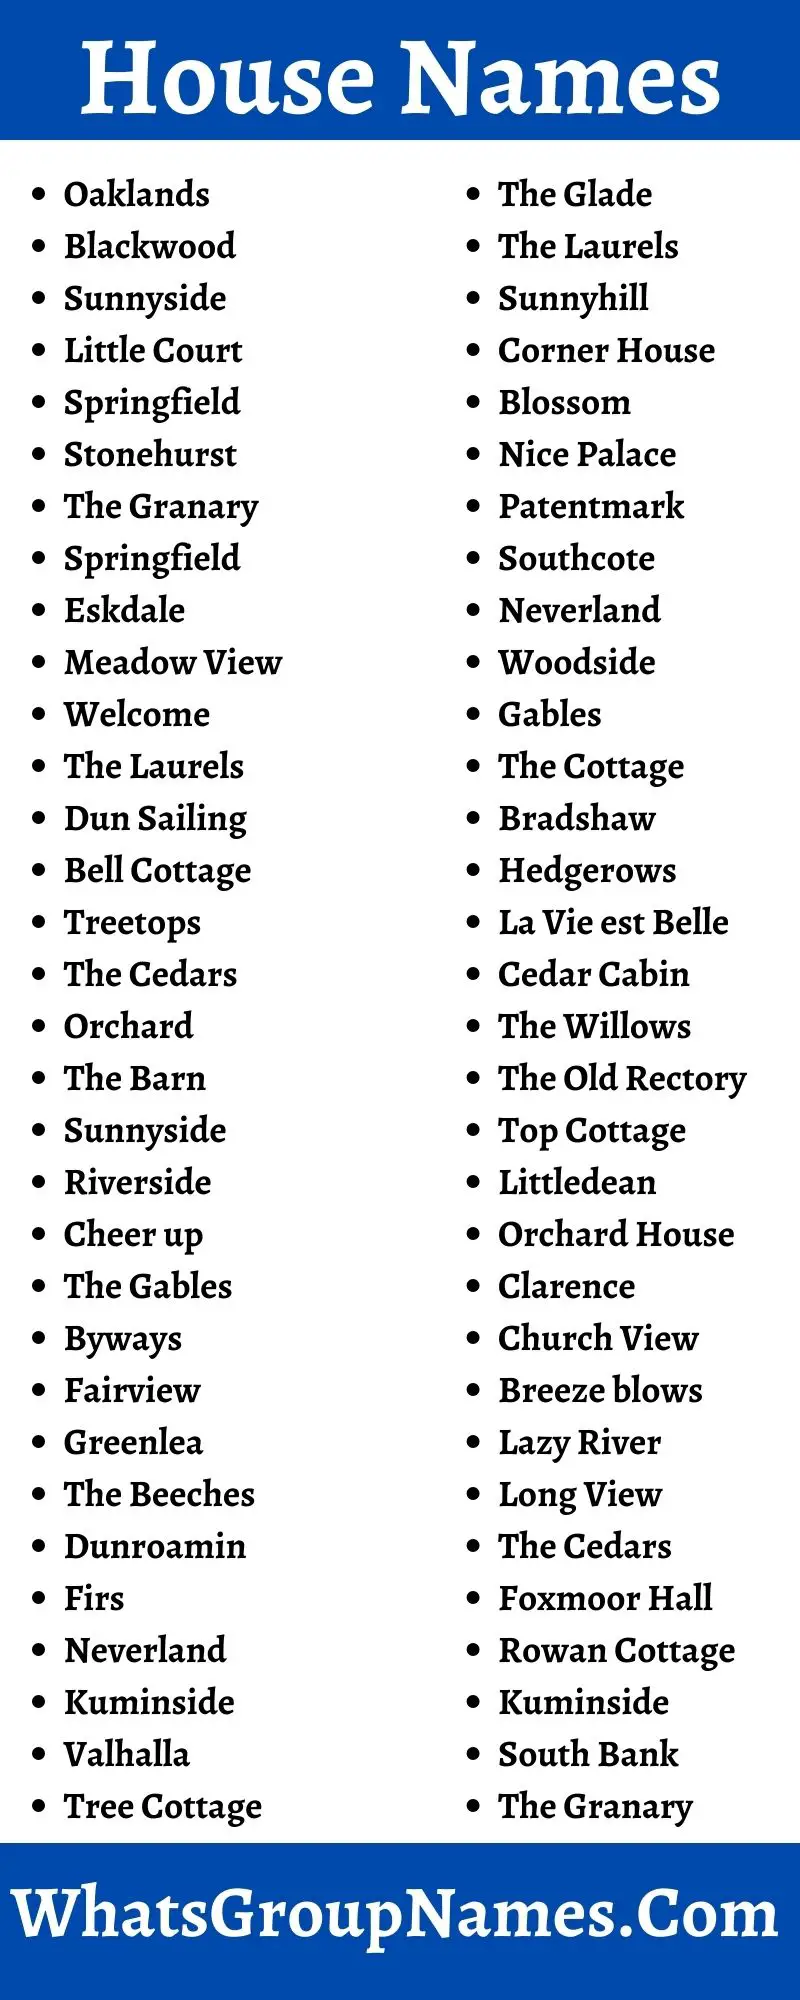 402+ House Names To Make Your House's Proper Identity